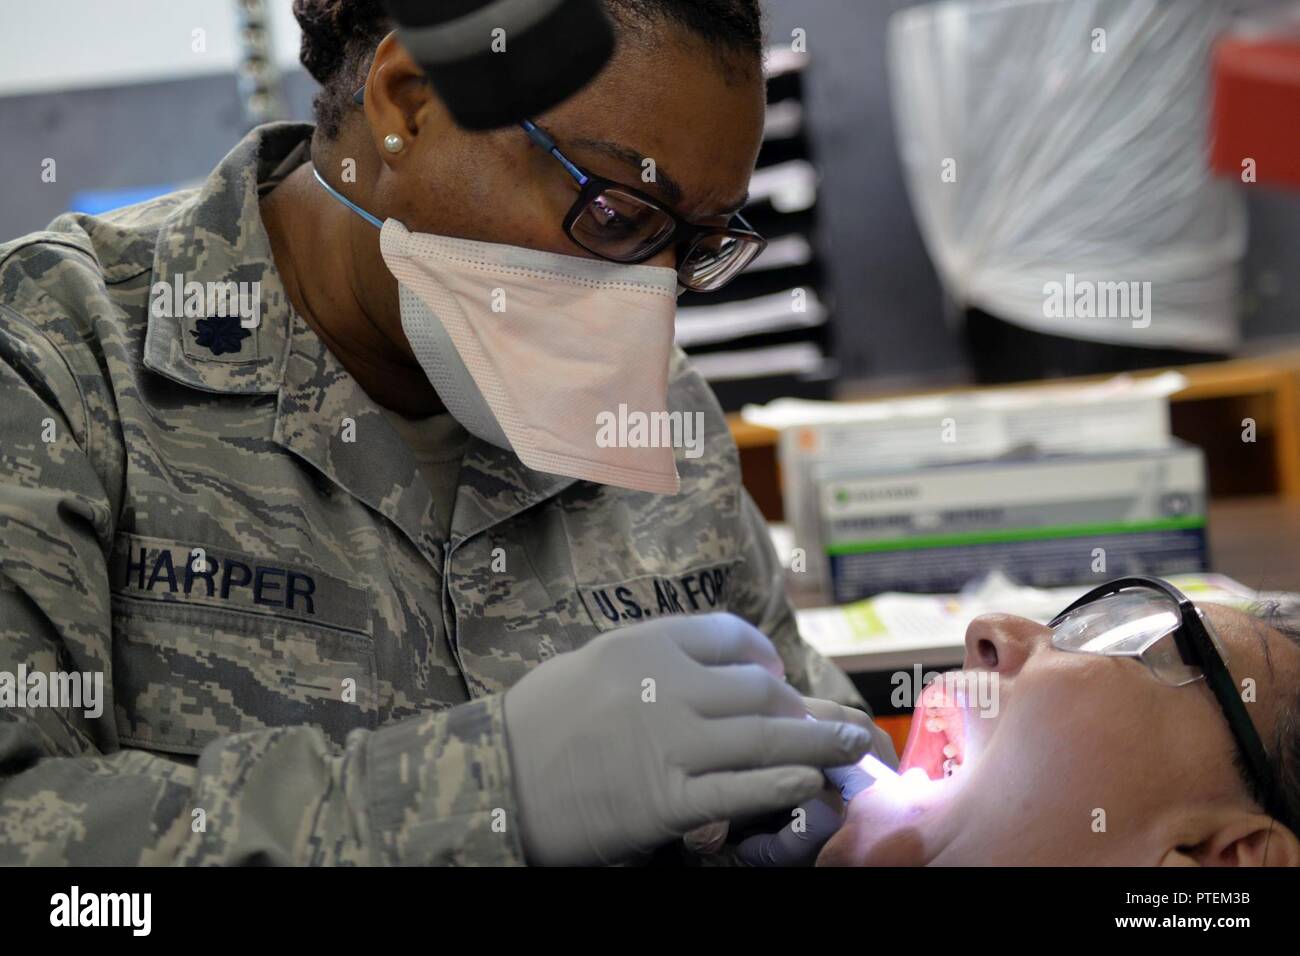 Lt. Colonel Tiffany Harper, dentist from 192th Medical Group cleans a patient teeth during a Innovative Readiness Training in Tangipahoa Parish, LA. July 14, 2017. Innovative Readiness Training builds mutually beneficial civil-military partnerships between US communities and the Department of Defense. These missions provide high quality, mission-essential training for Active, Guard, and Reserve support personnel and units. Stock Photo